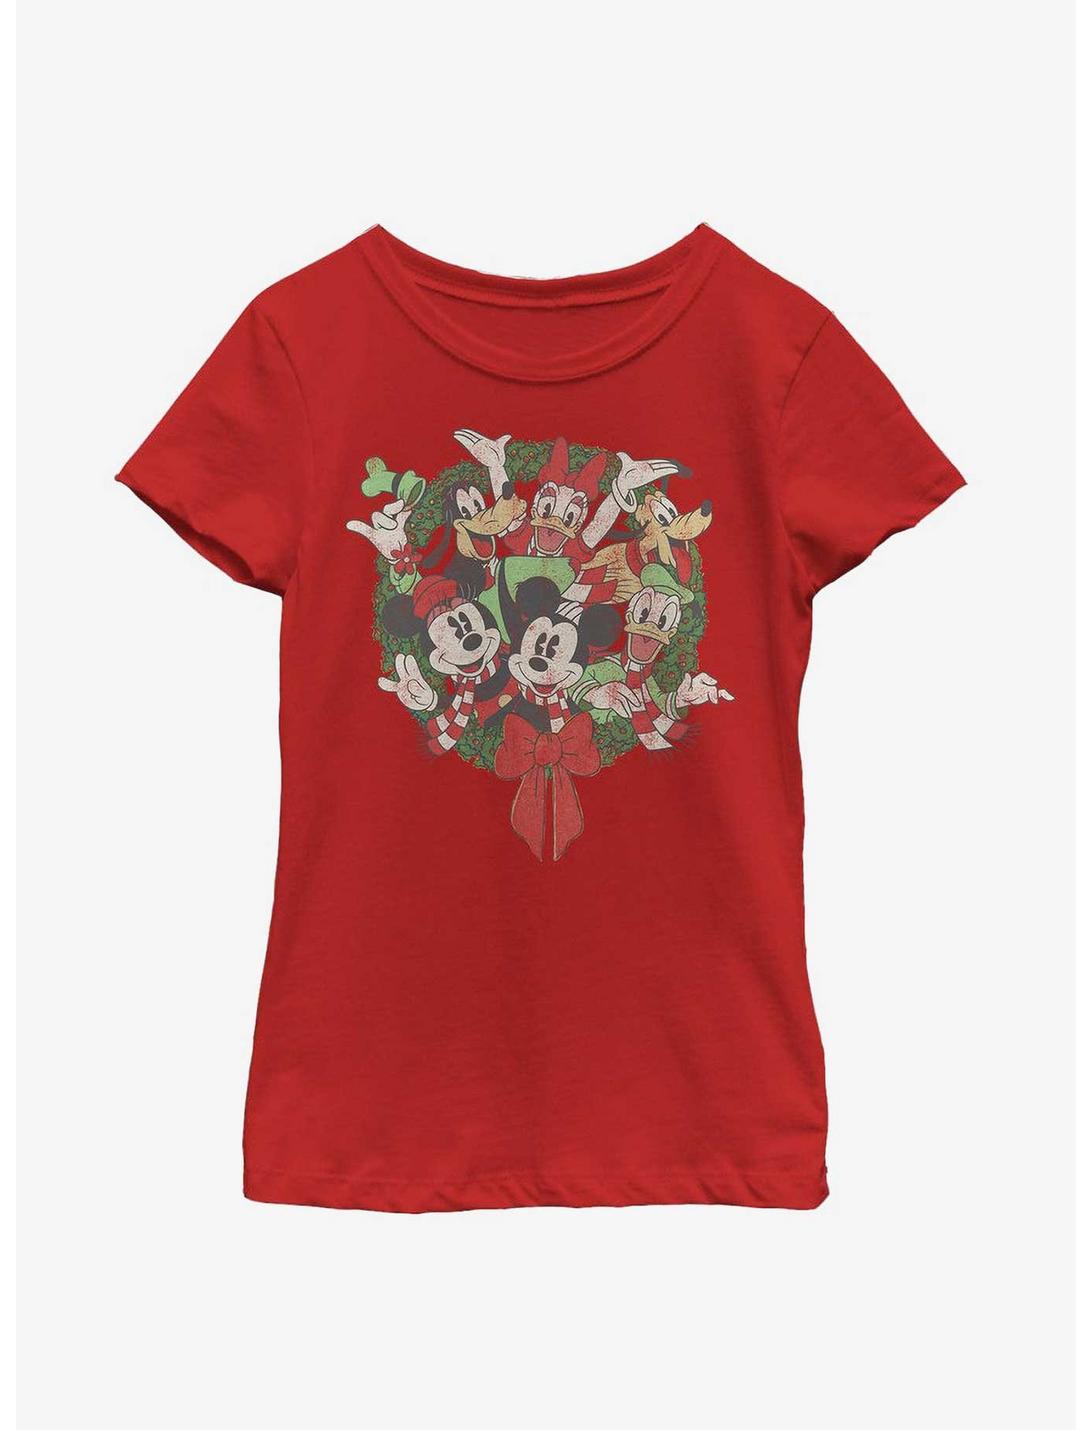 Disney Mickey Mouse Mickey & Friends Christmas Wreath Youth Girls T-Shirt, RED, hi-res